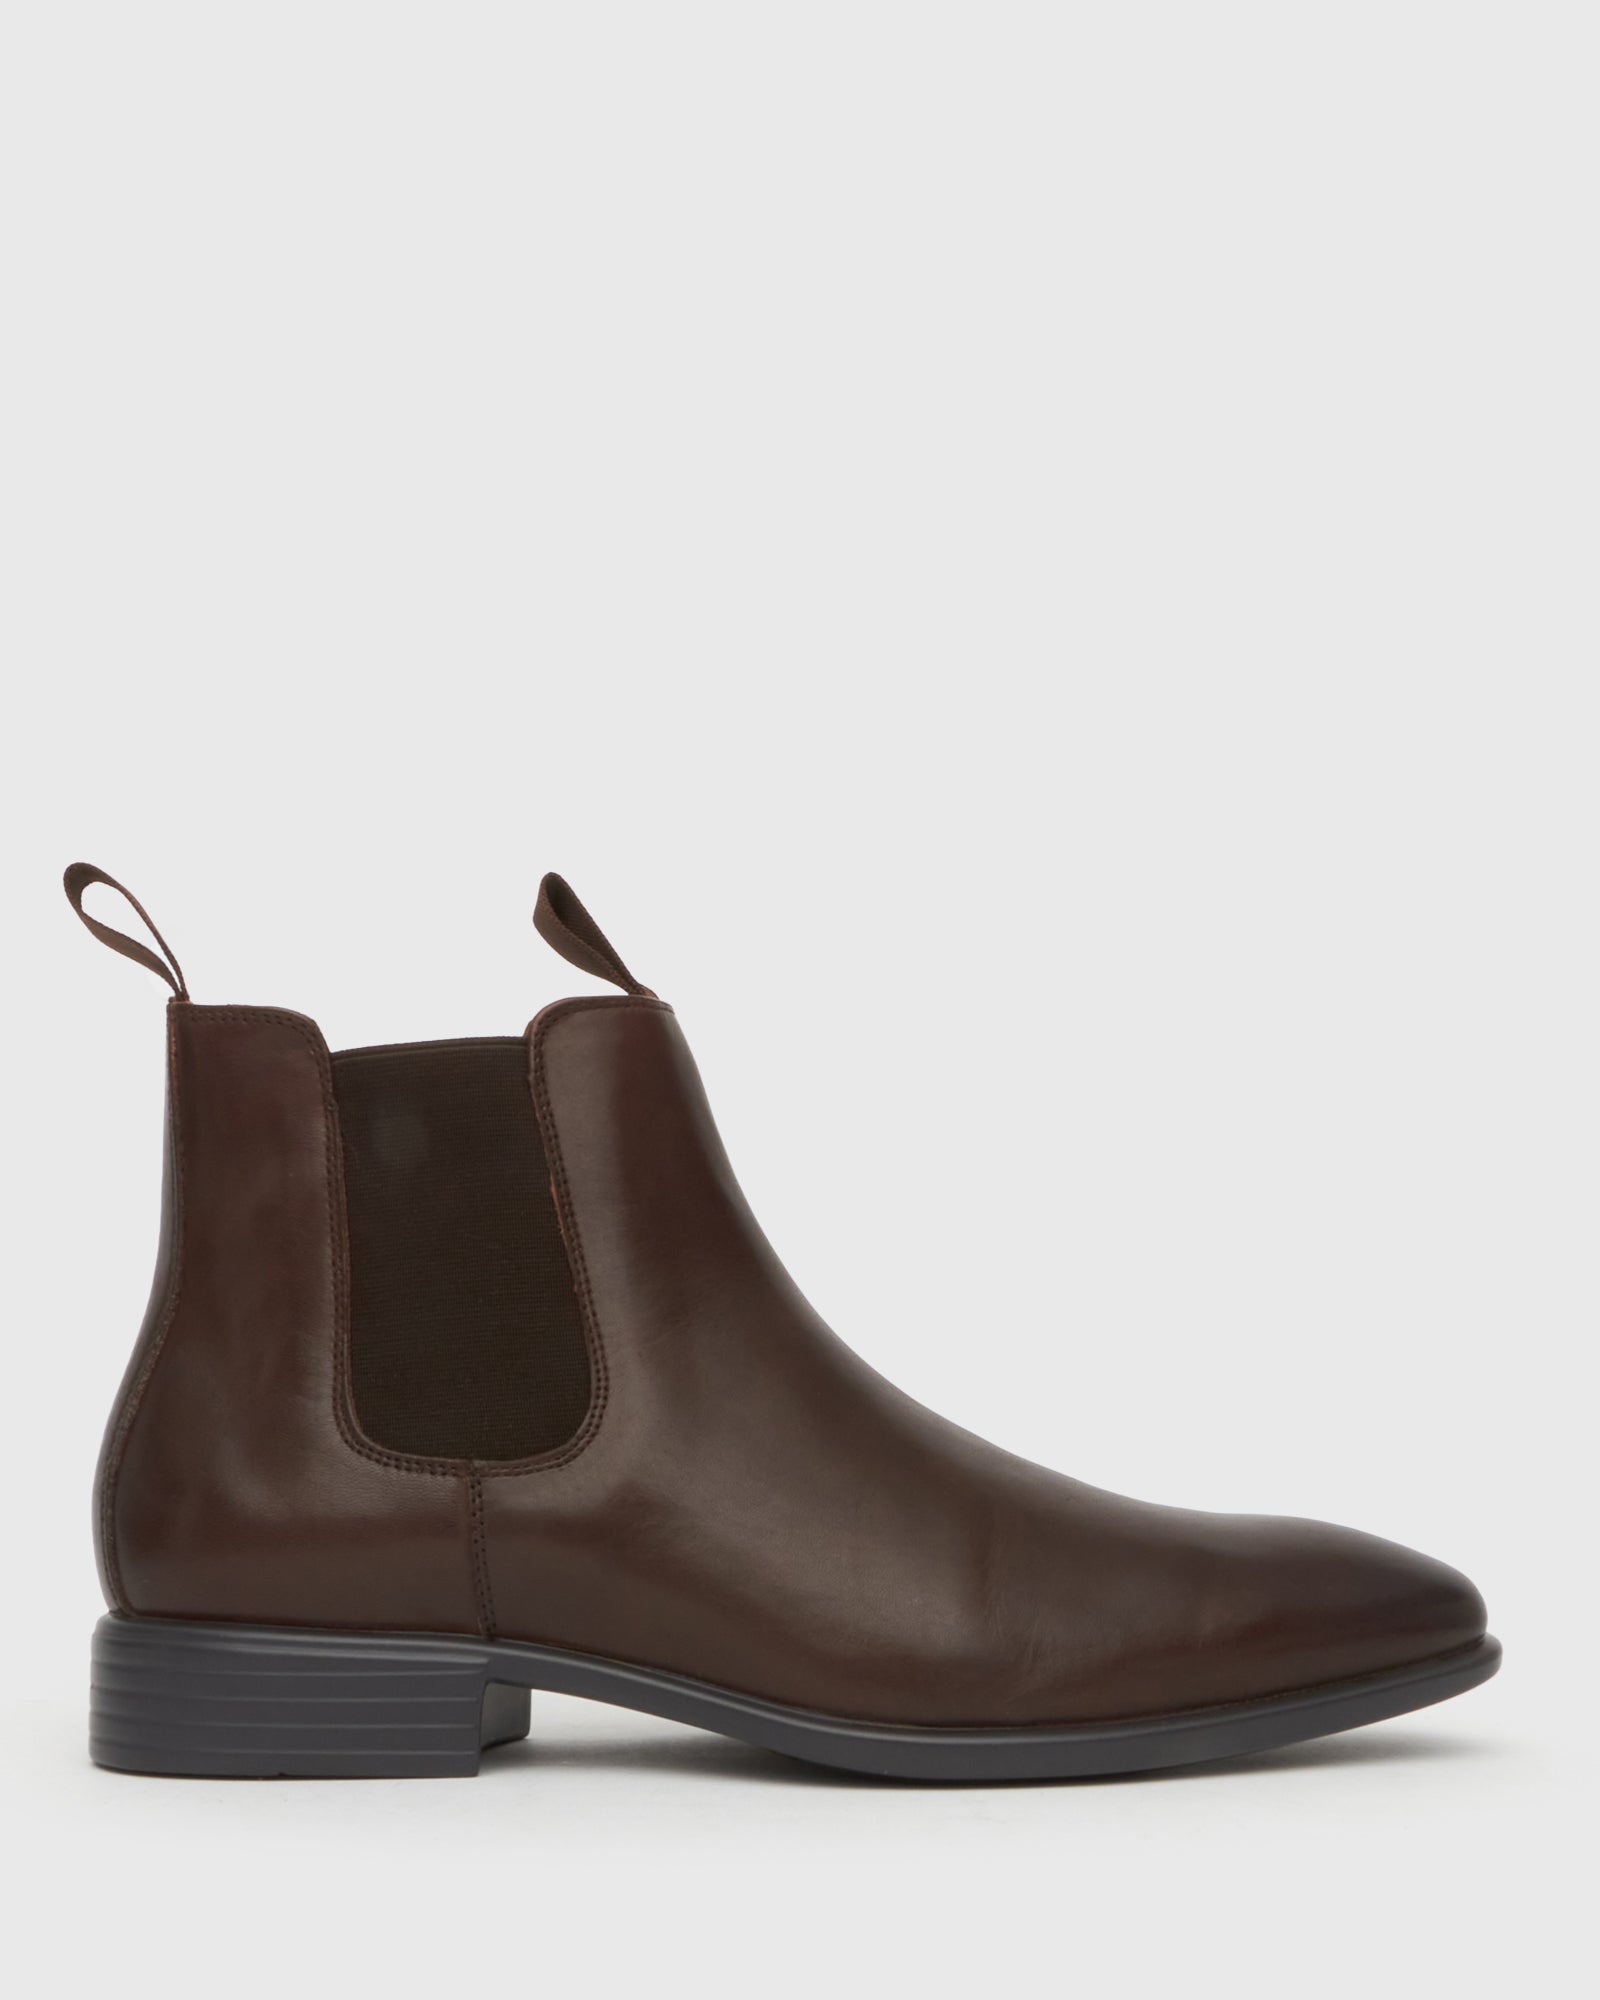 Buy Wider Fit HENRY Leather Chelsea Boots by Airflex online - Betts